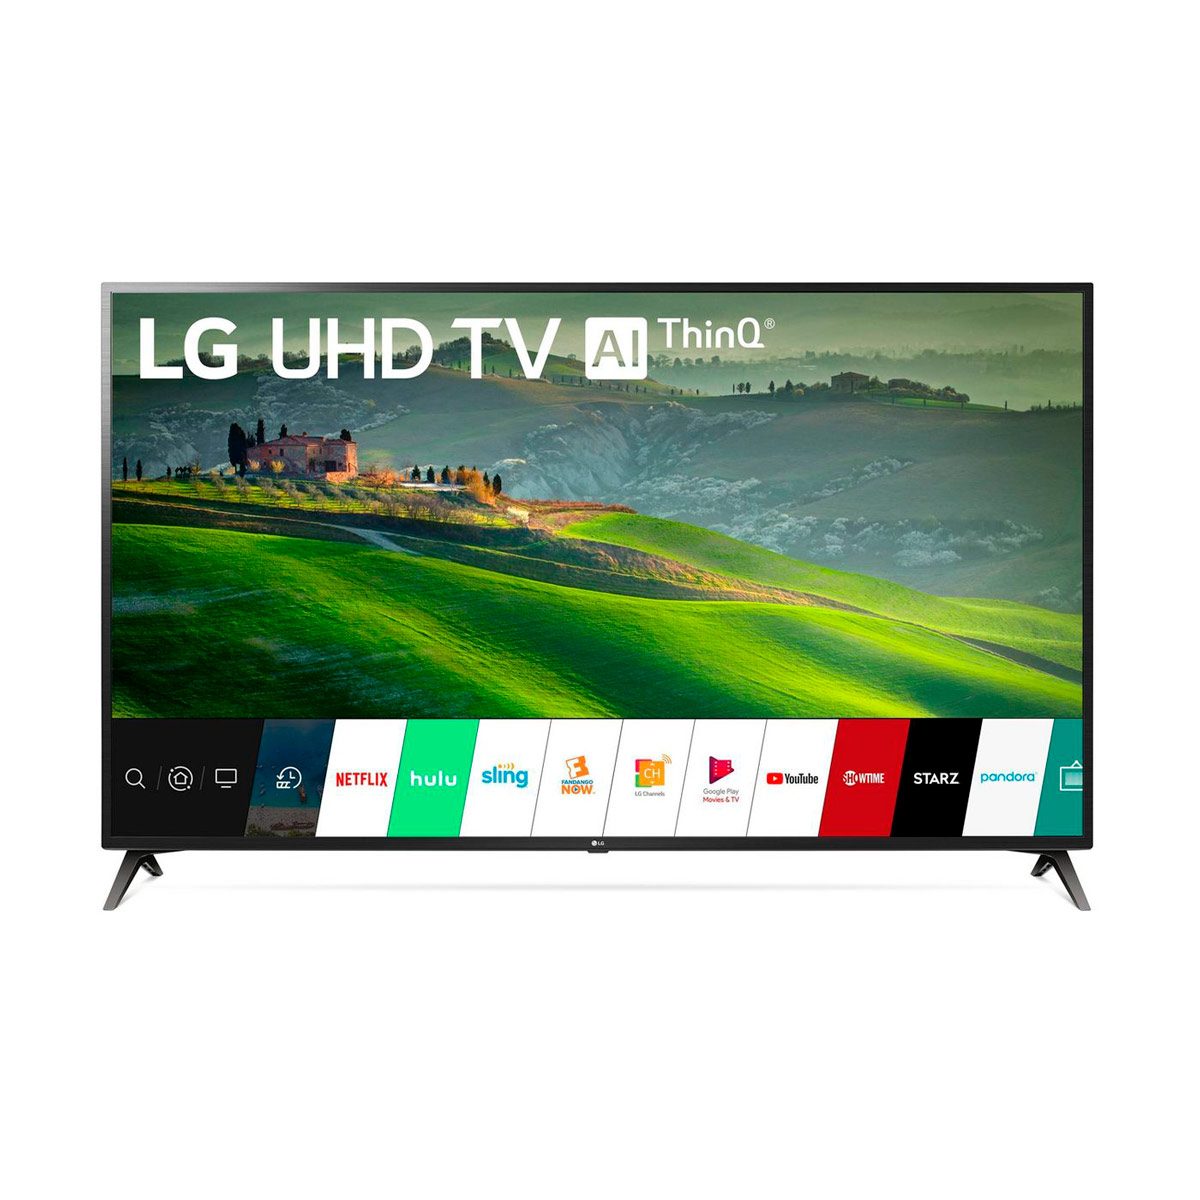 The Best Black Friday Deals on TVs for 2019